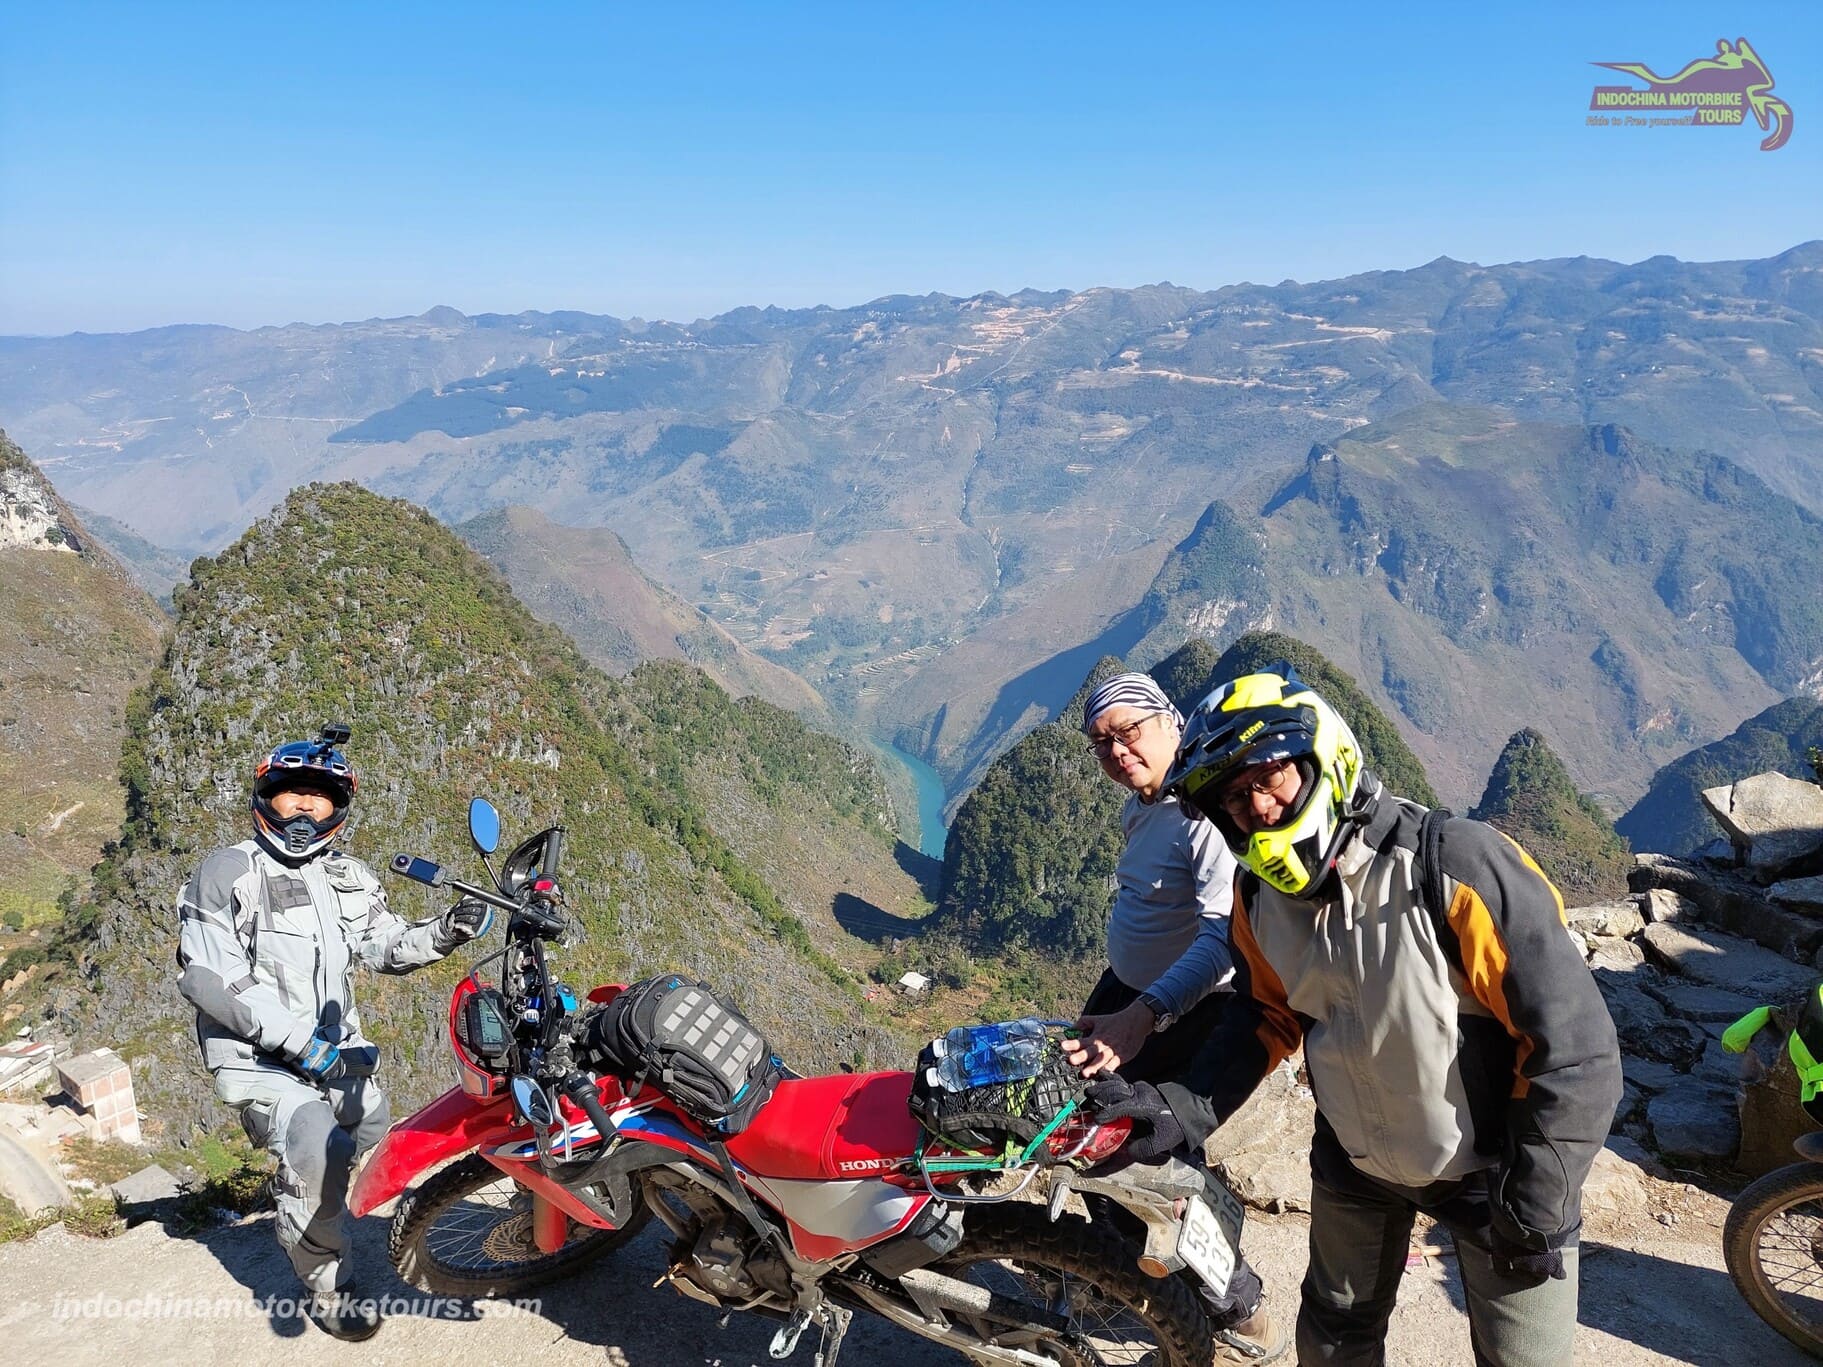 DREAMING VIETNAM OFFROAD MOTORCYCLE TOUR TO HA GIANG